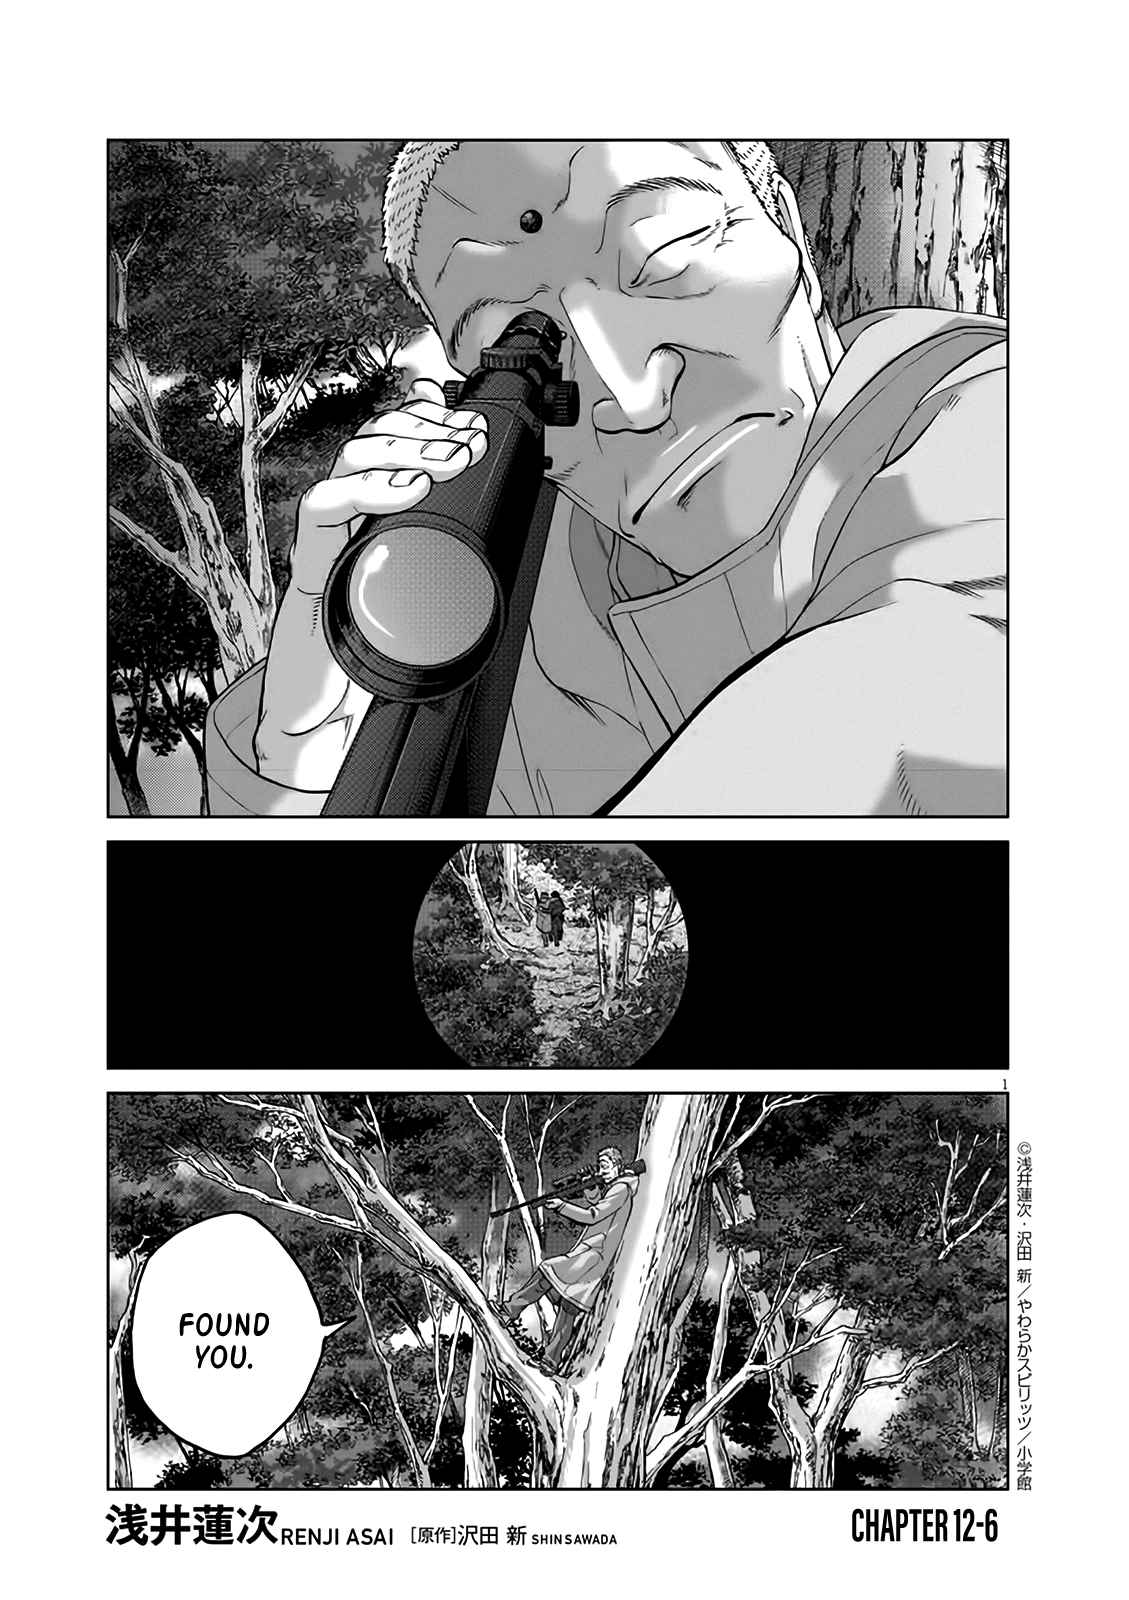 The Violence Action Vol. 5 Ch. 12.6